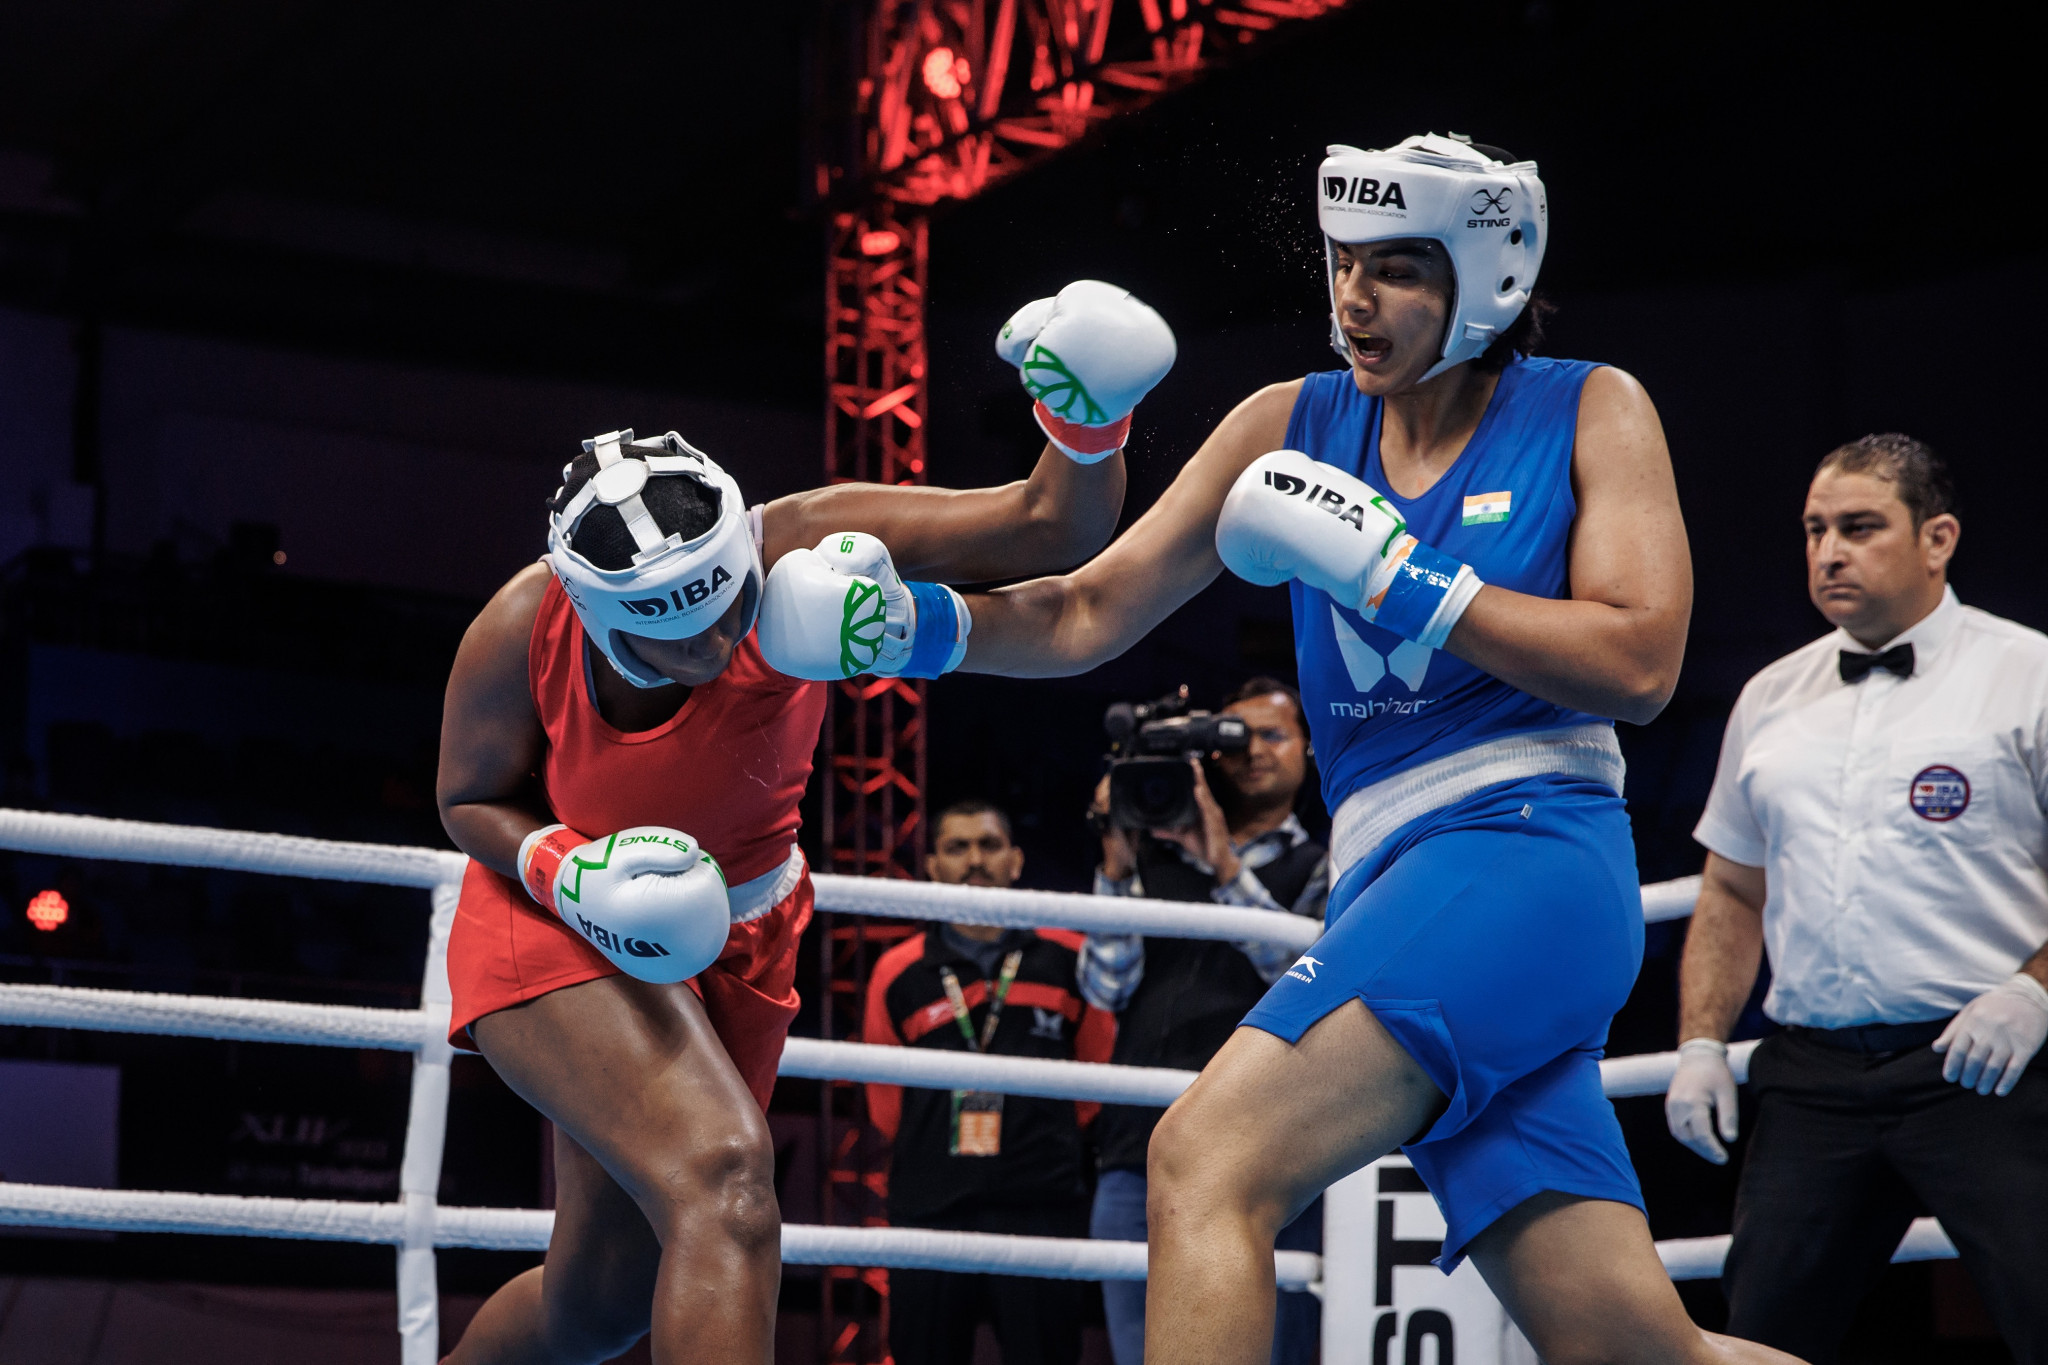 Indian quartet put on a show on opening day of IBA Women's World Championships